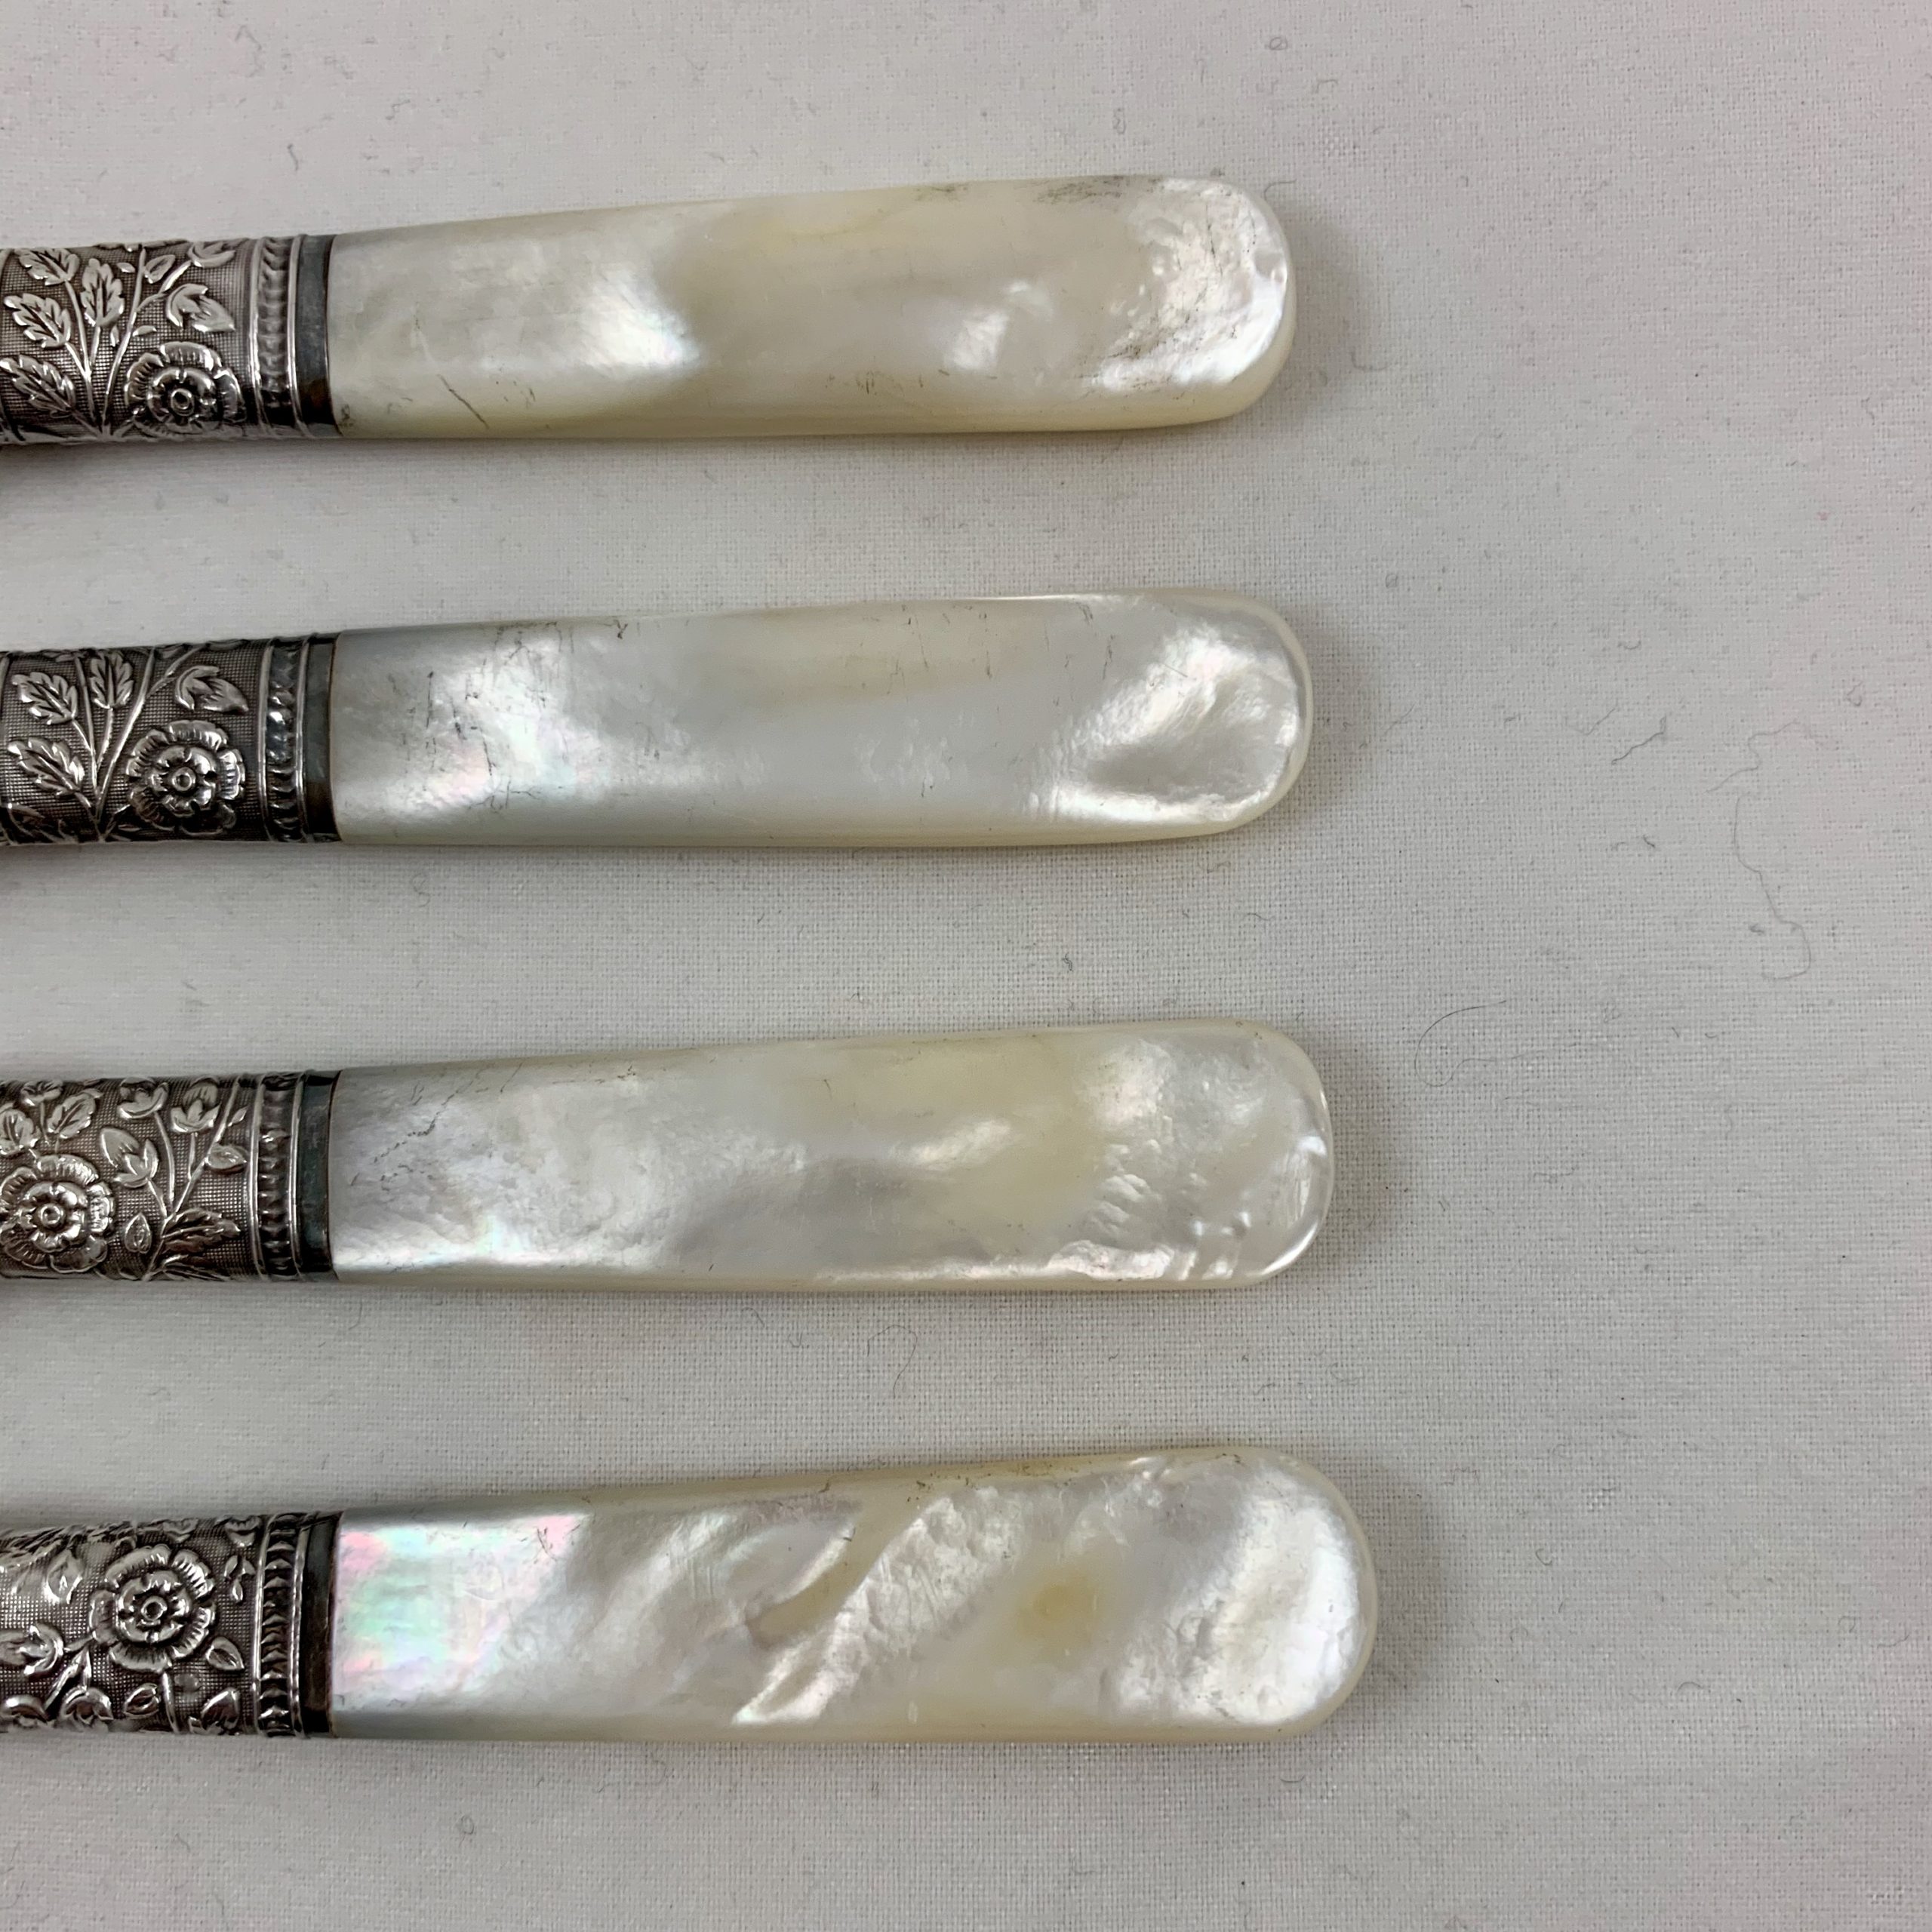 LOVELY Lustrous Mother of Pearl Handle Knives, Set of 4 Beautiful - Ruby  Lane